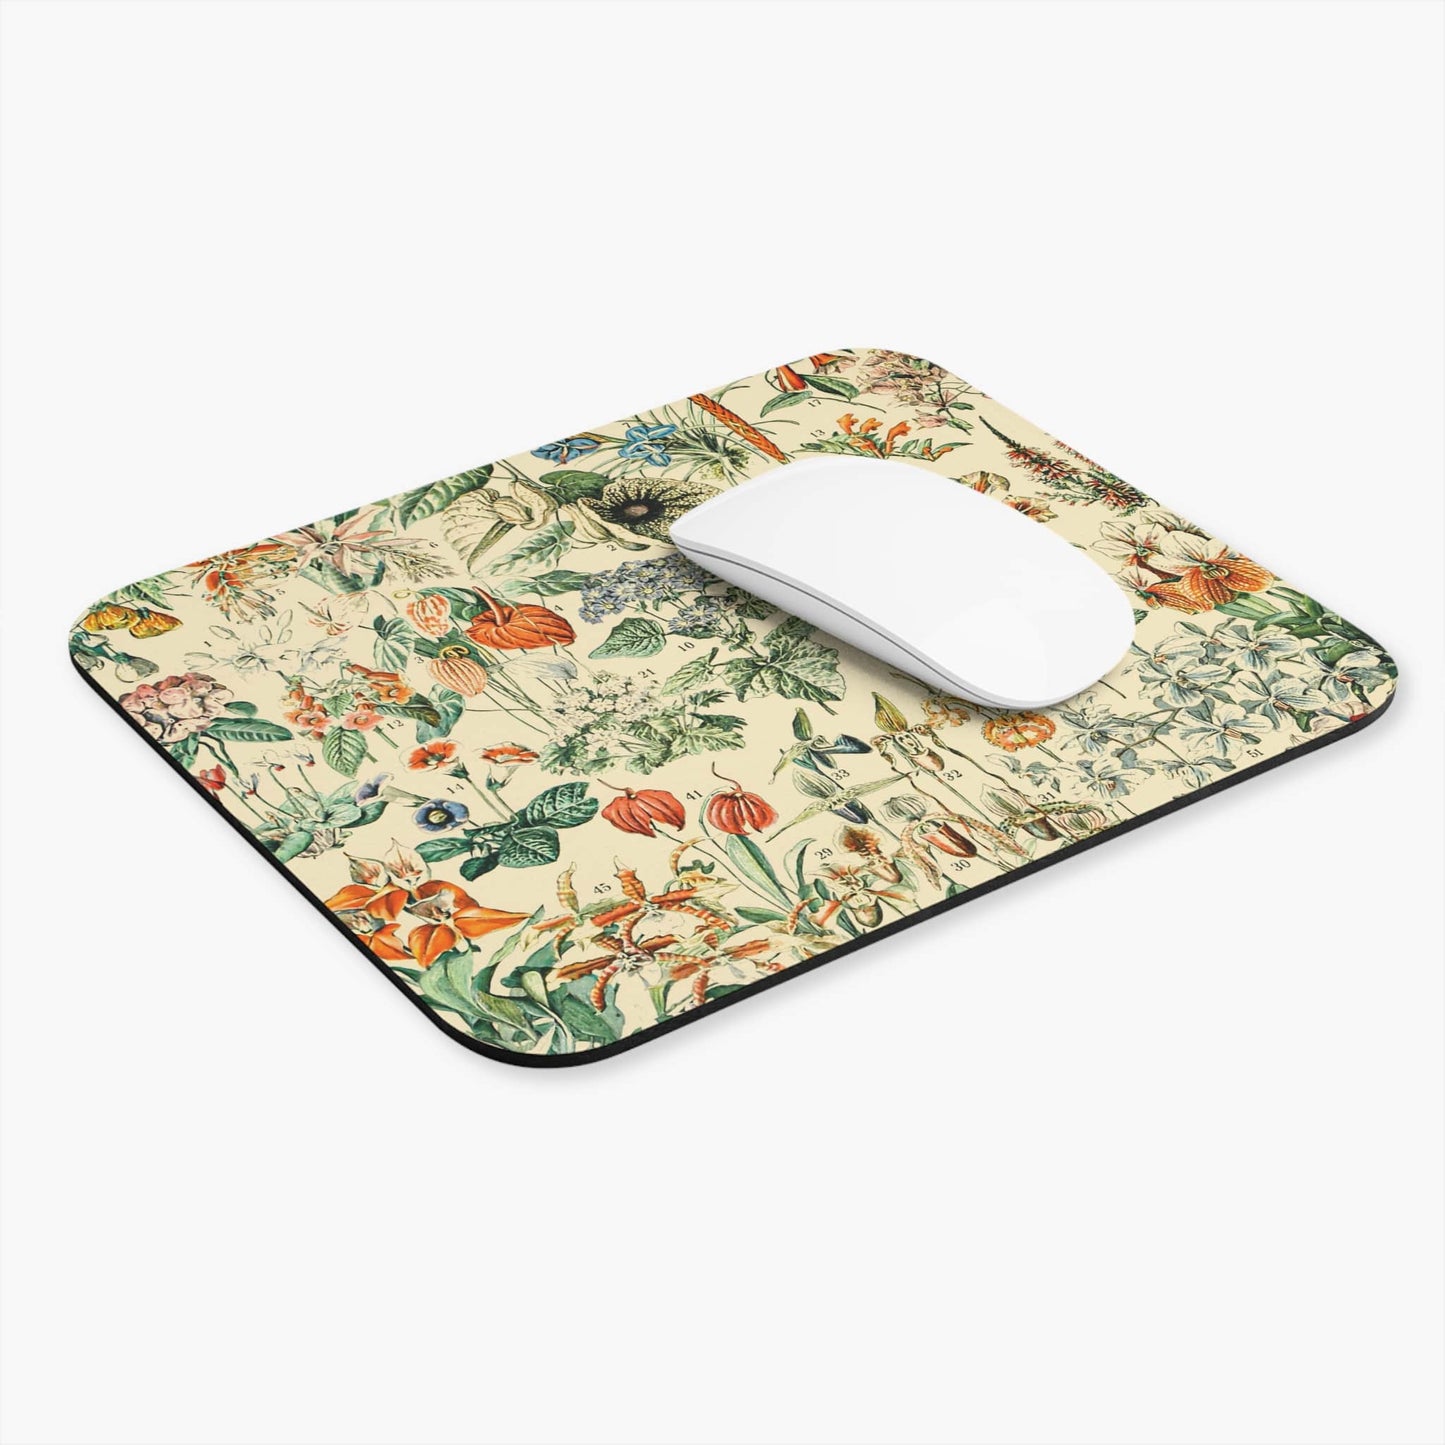 Wildflower and Plants Computer Desk Mouse Pad With White Mouse